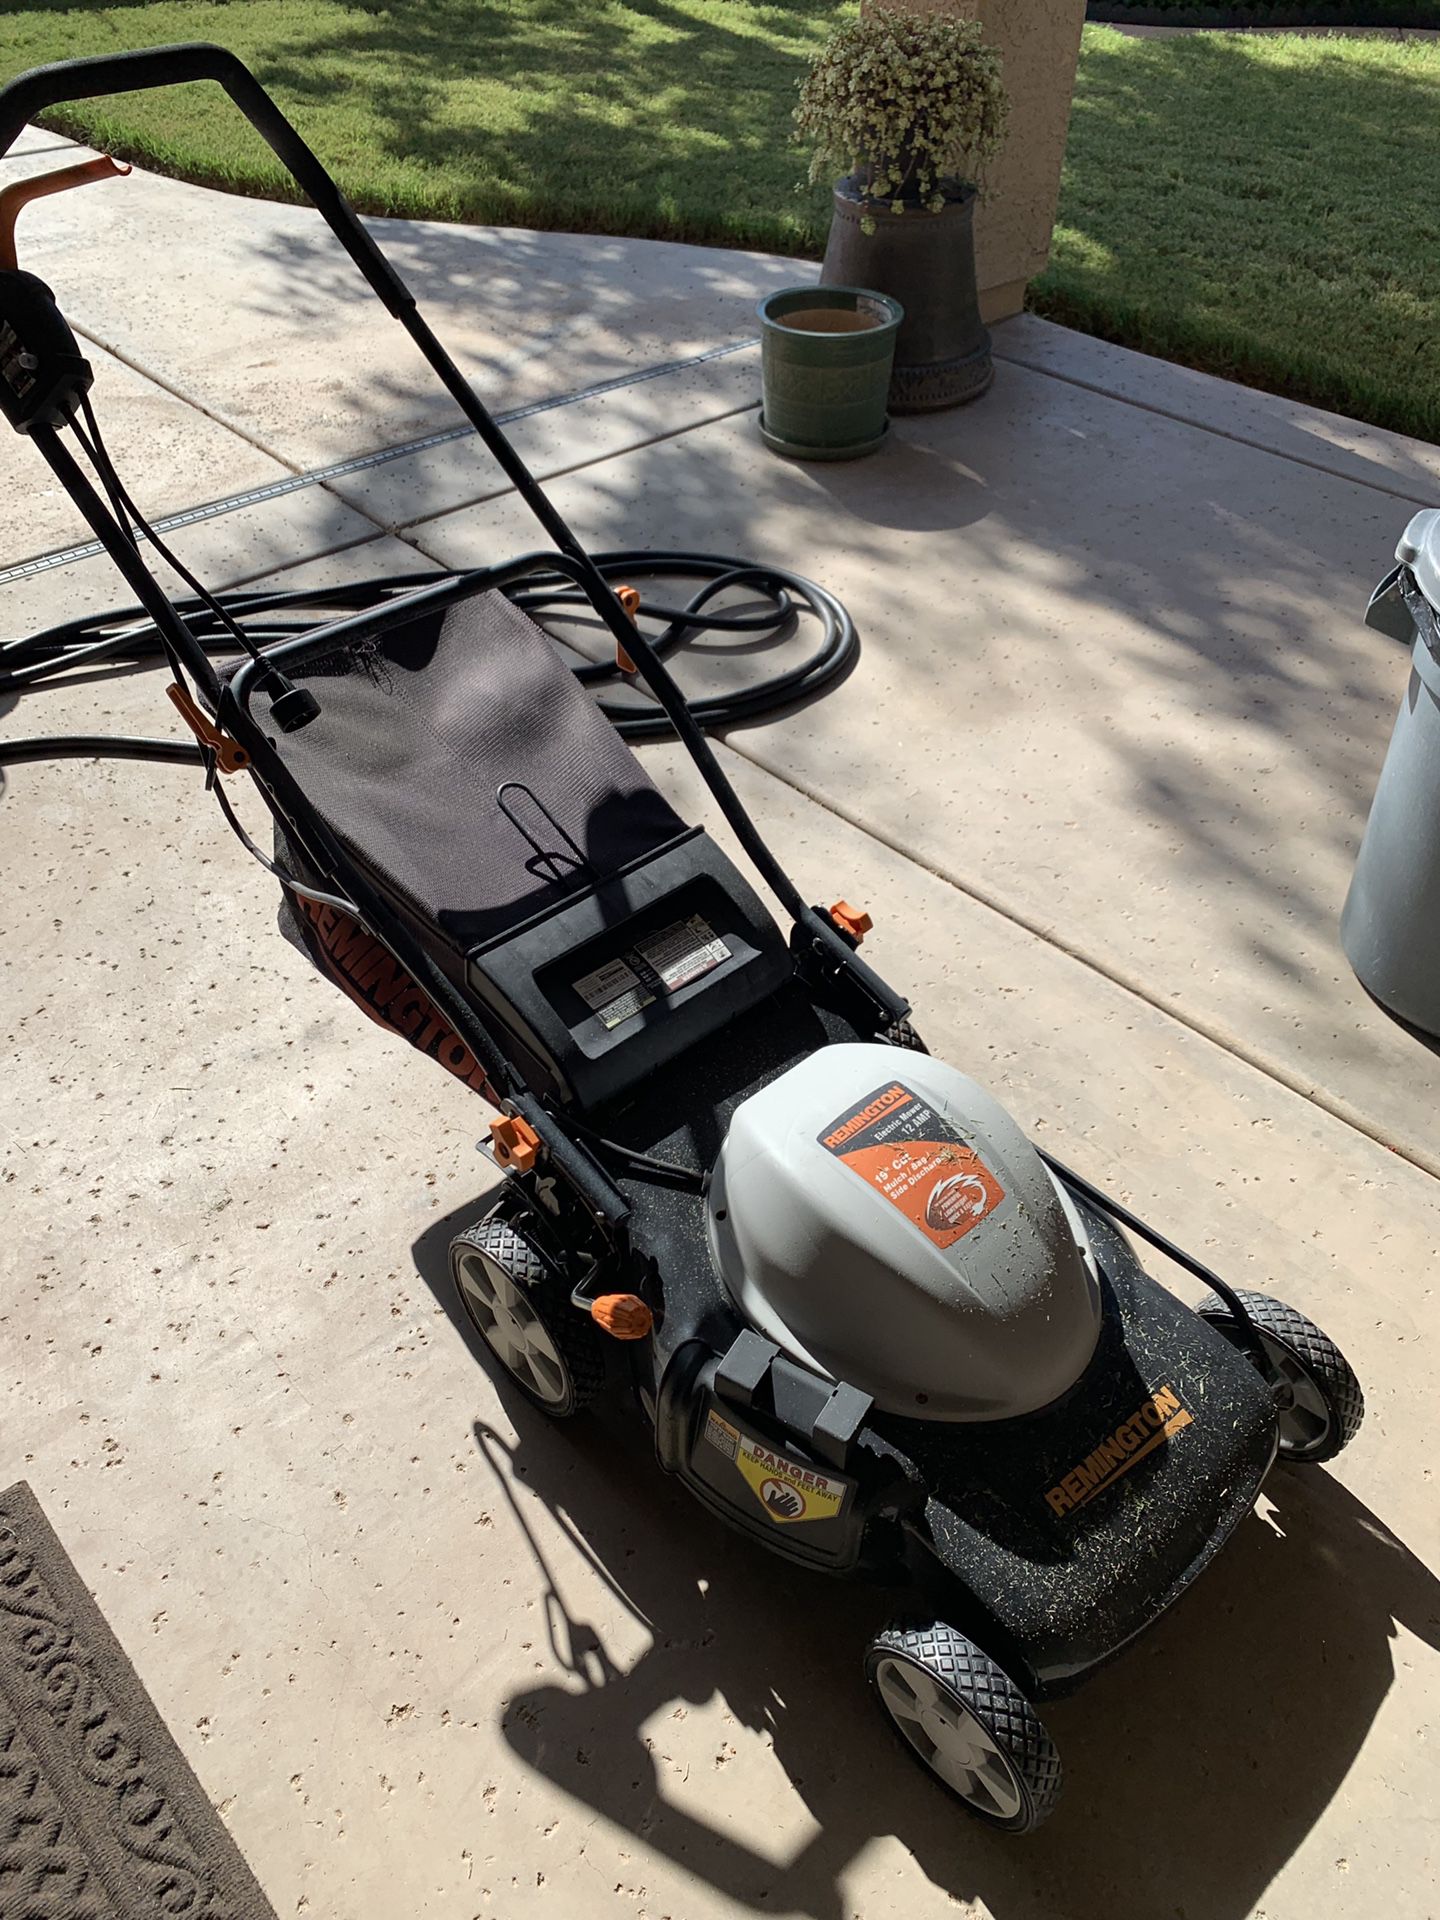 Electric lawn mower and weed eater